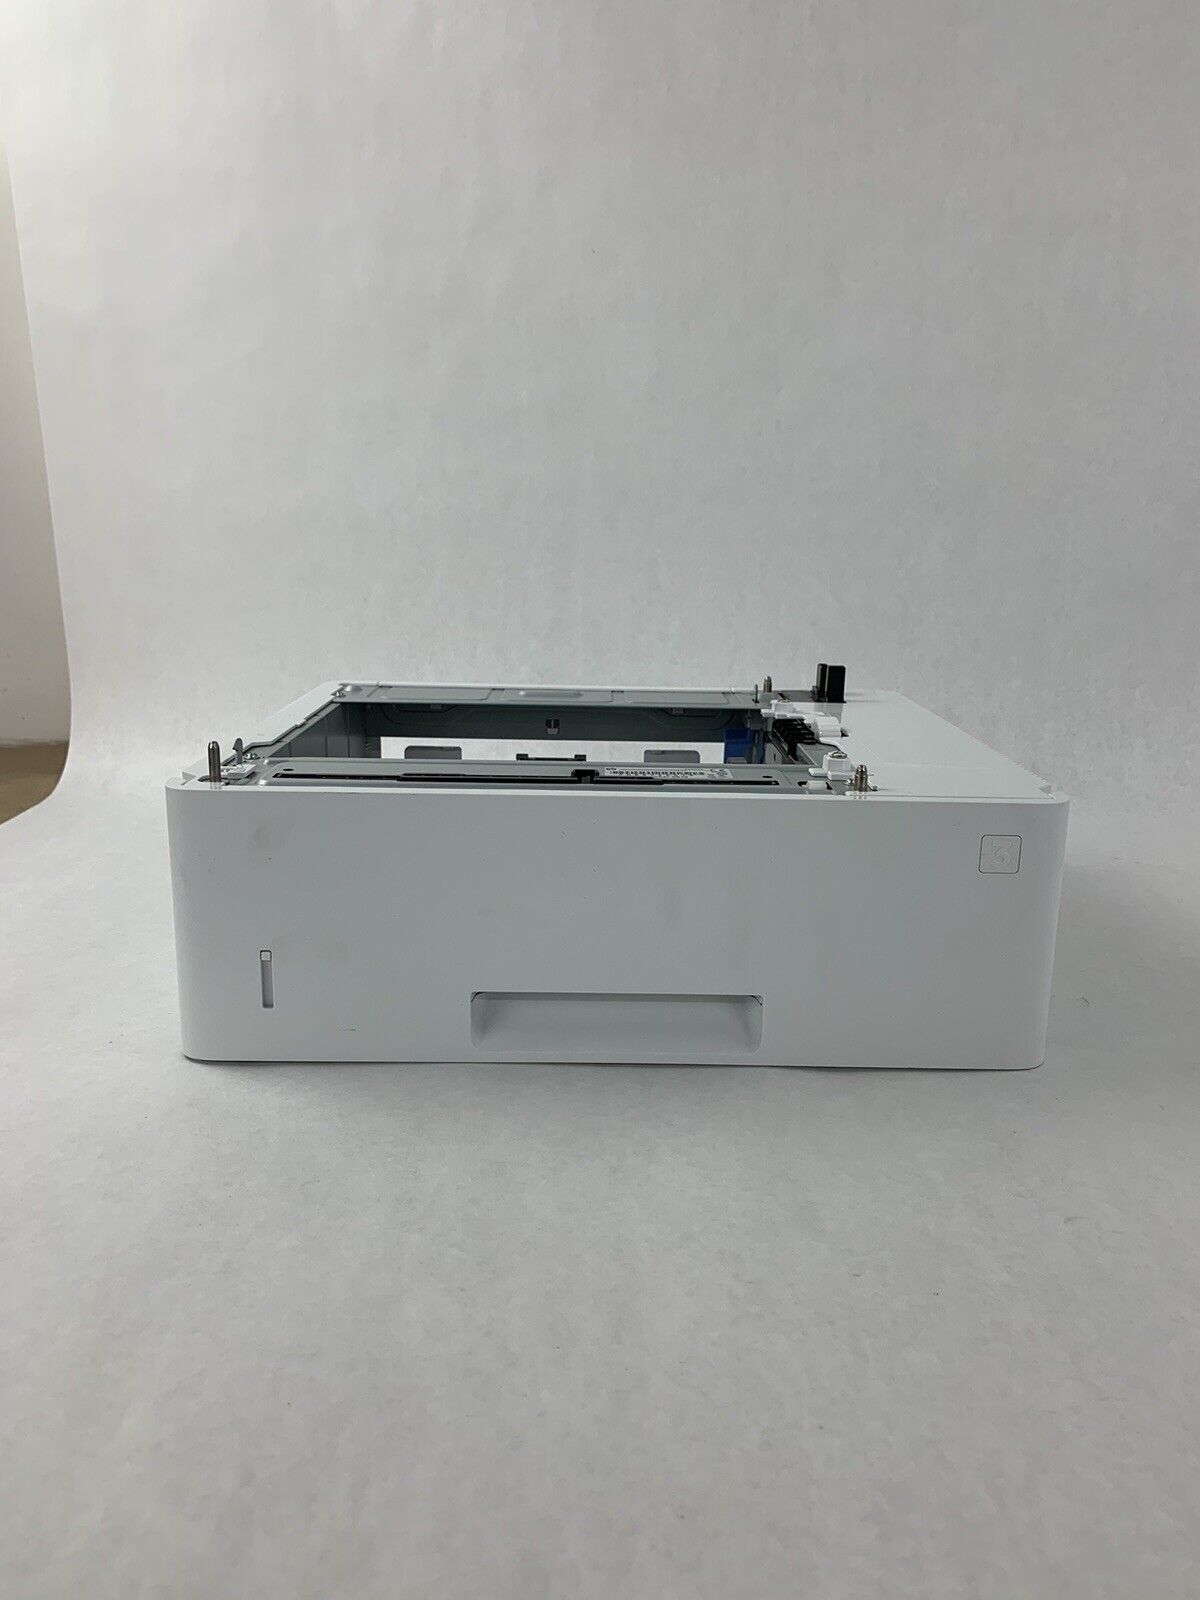 OEM HP LaserJet M506 500 Sheet Paper Tray F2A72A Trays 3 and 4